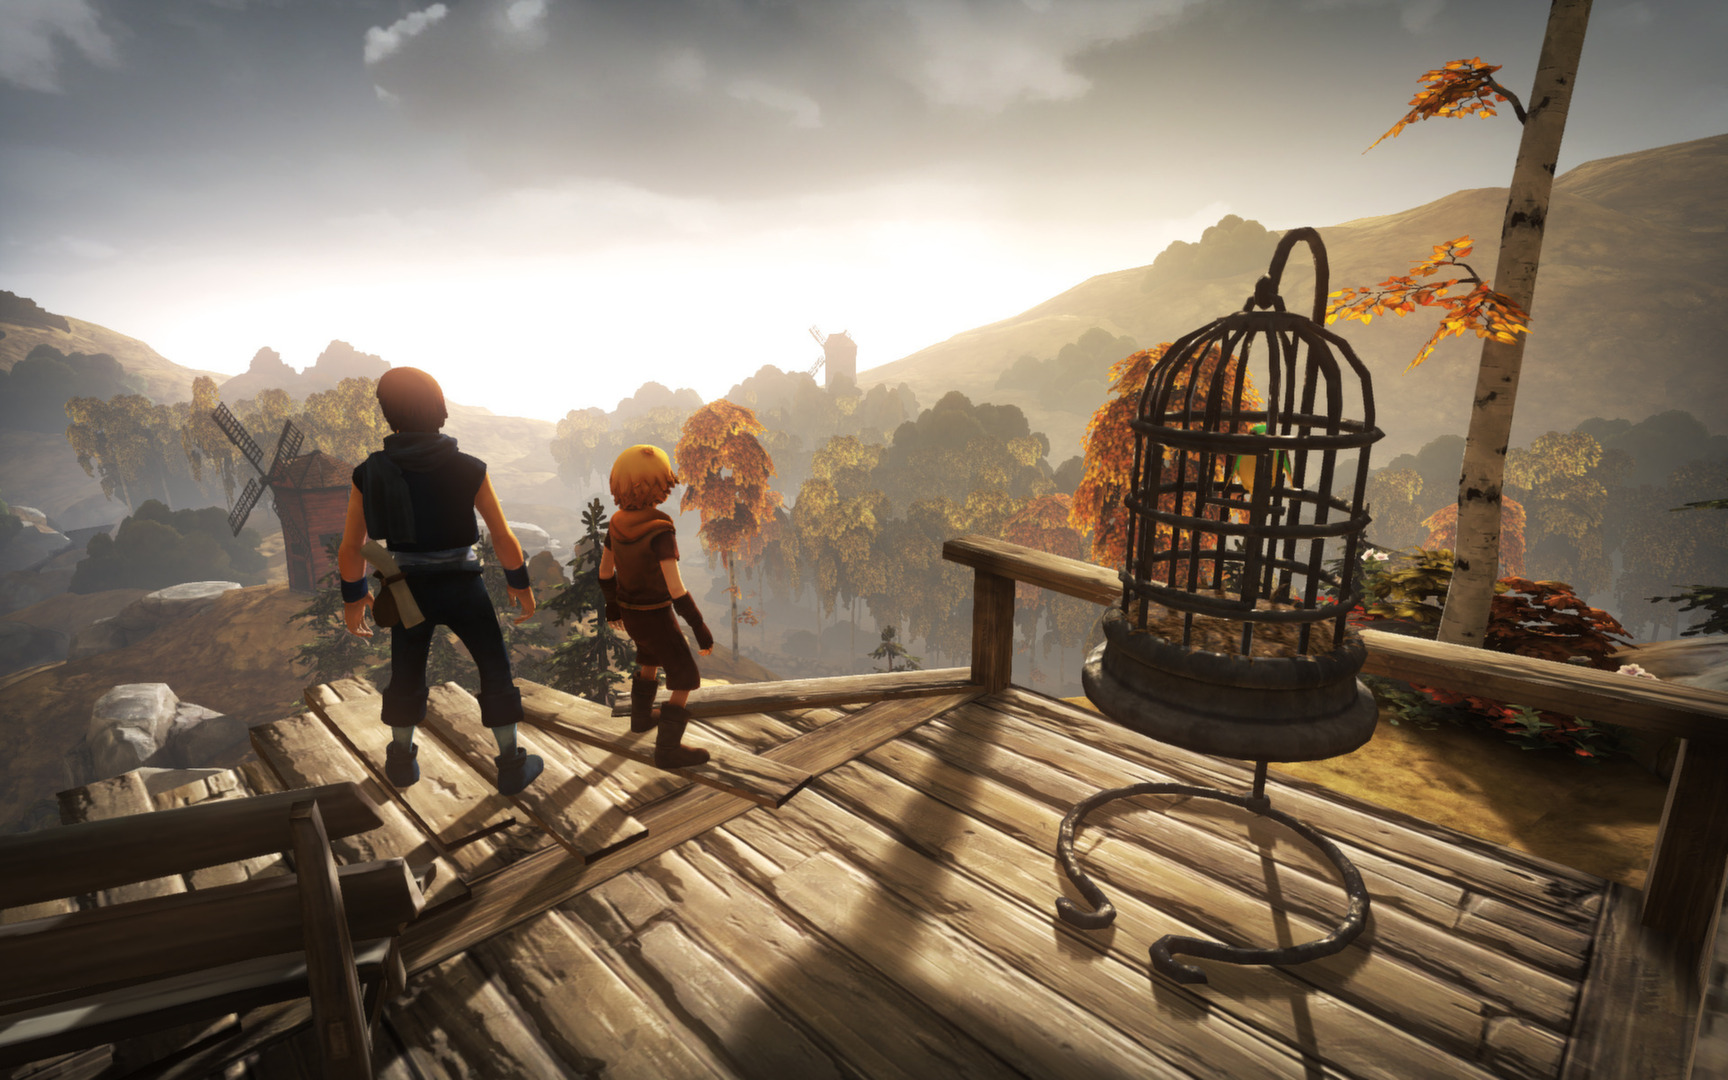 Game Brothers: A tale of two sons